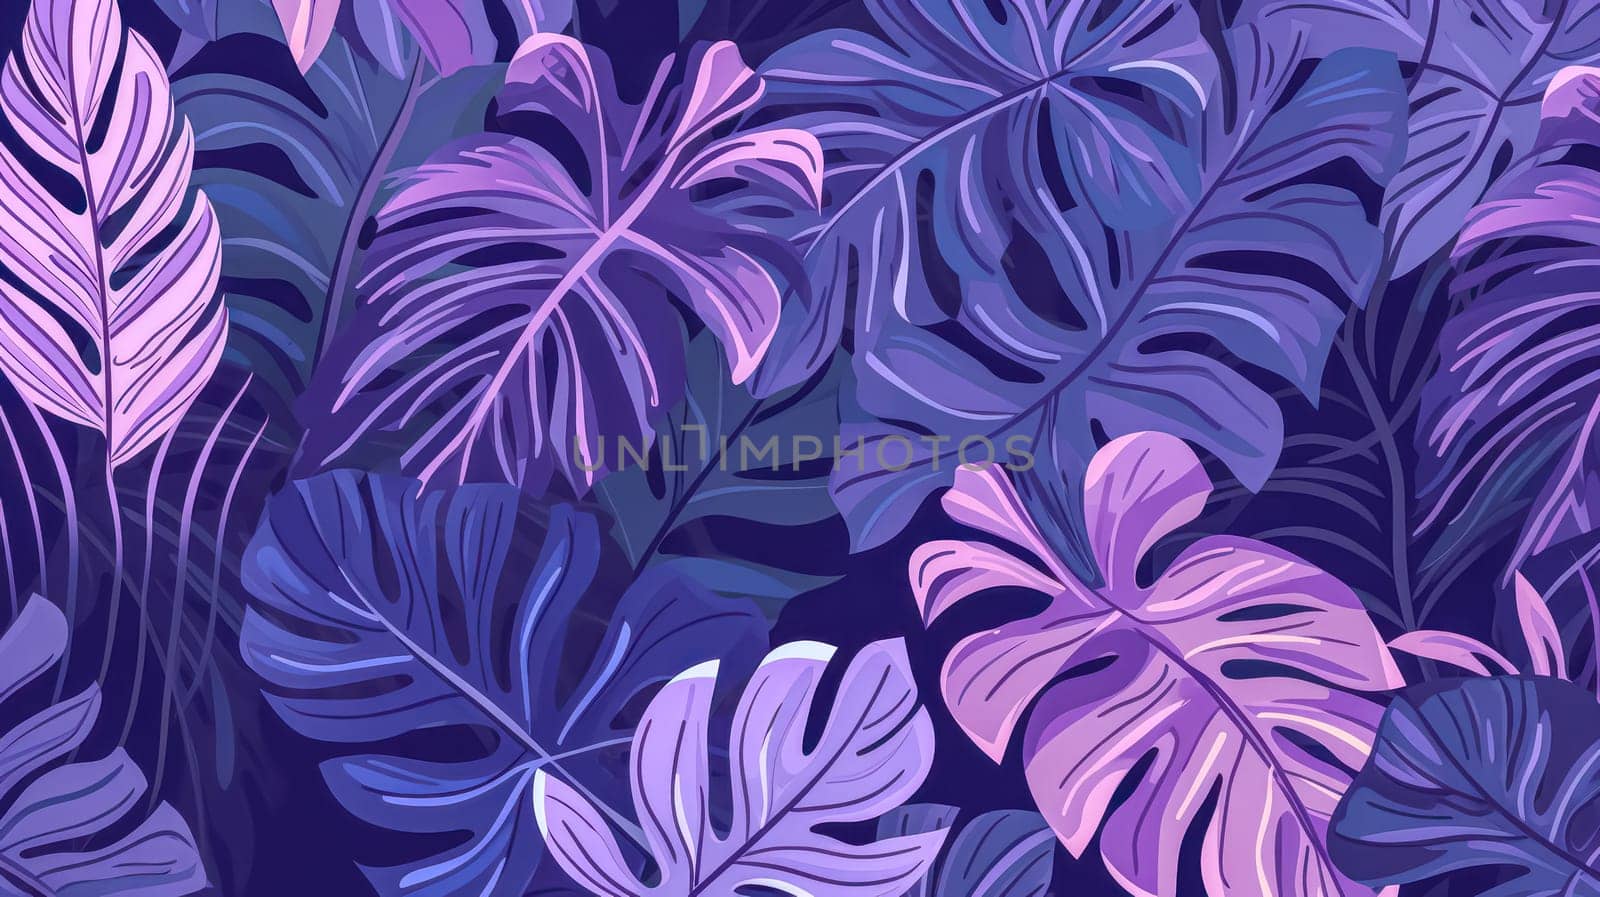 Vibrant neon tropical leaves, an artistic rendition of exotic tree and plant foliage. by Alla_Morozova93